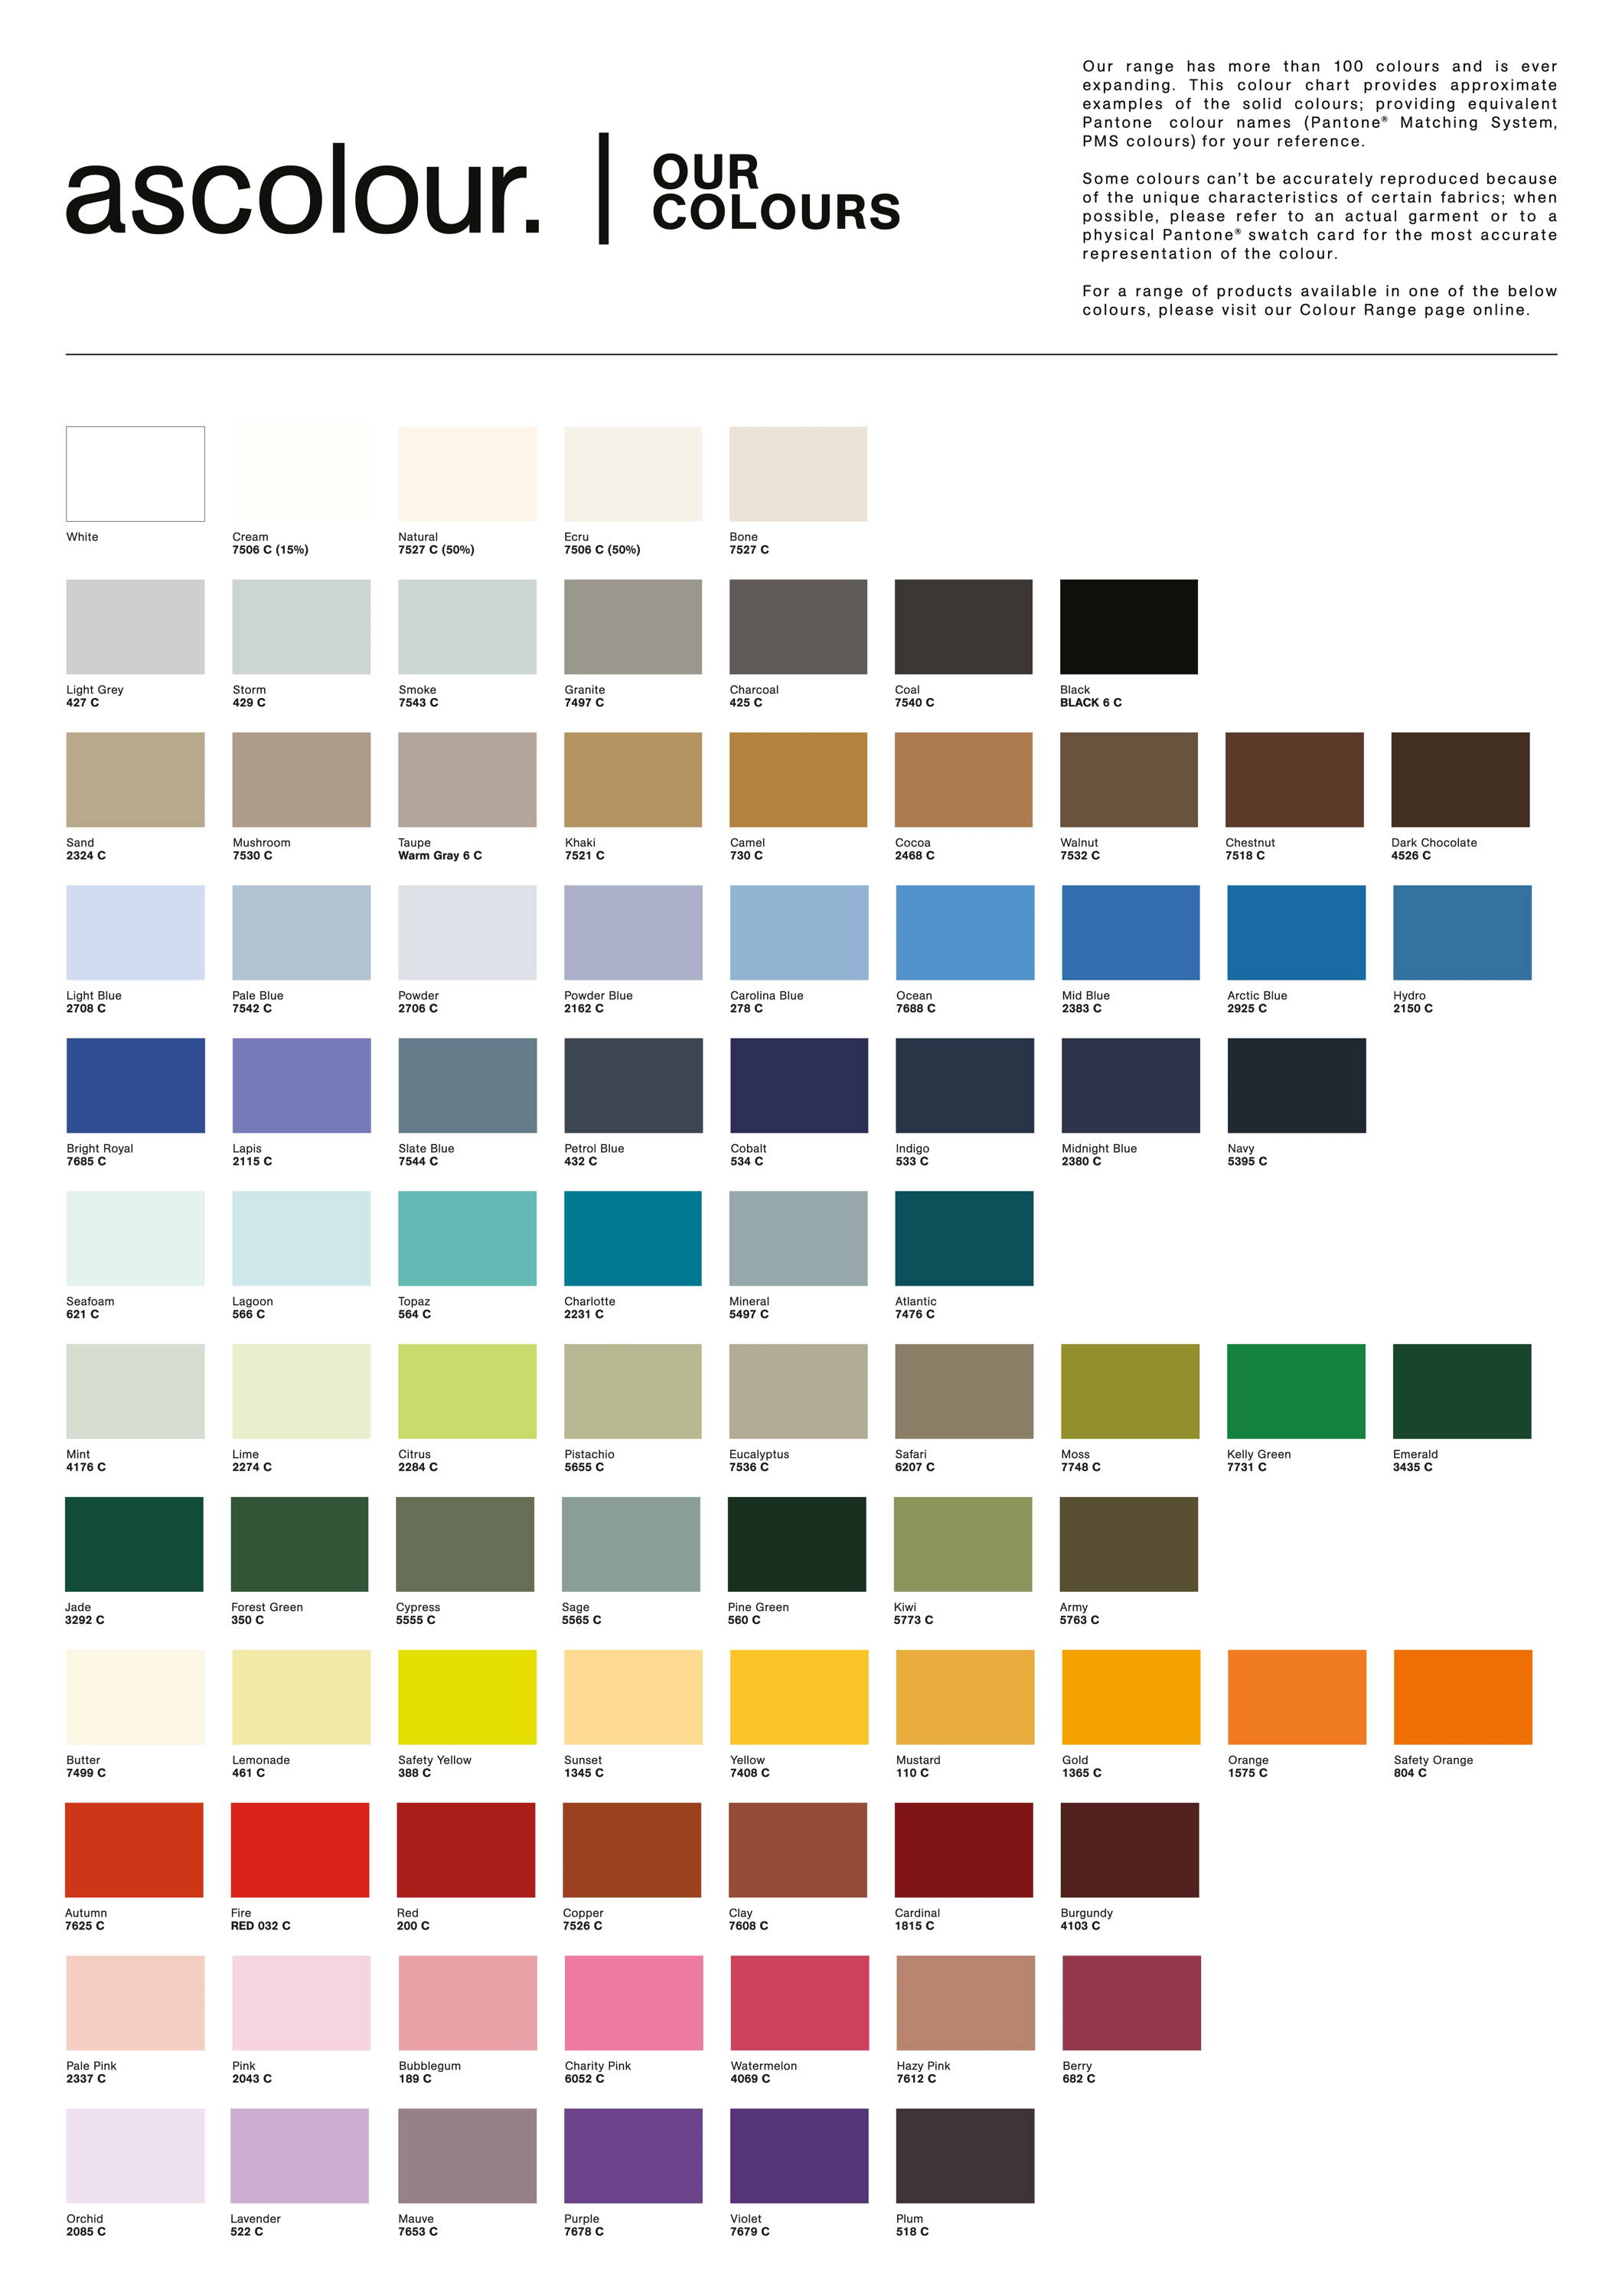 AS Colour - Our Colours - Click to Download